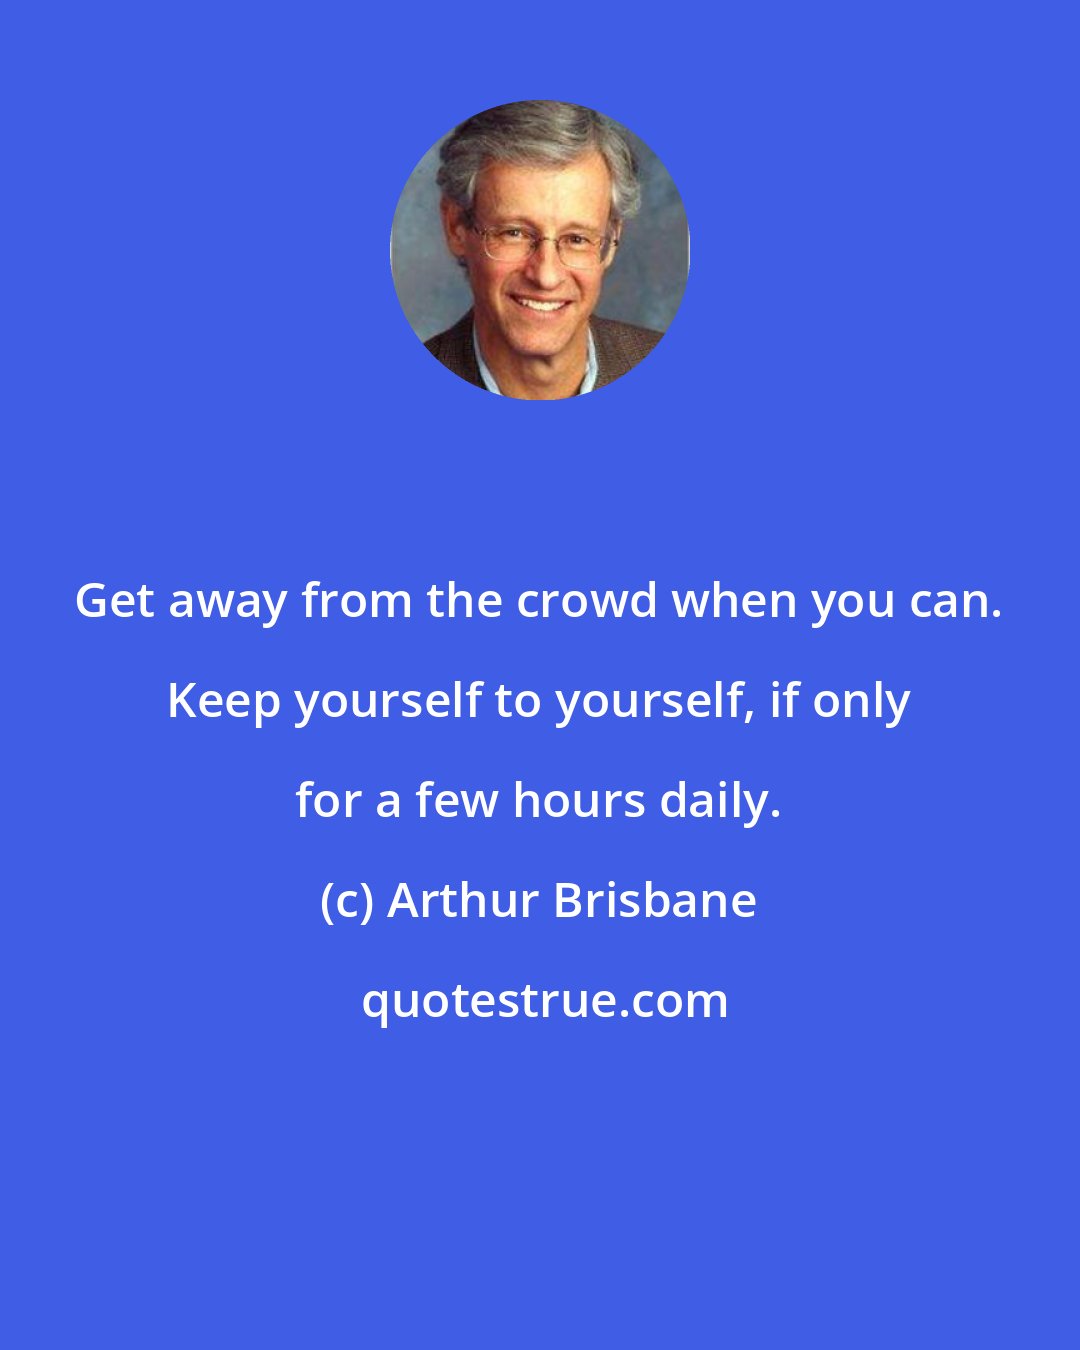 Arthur Brisbane: Get away from the crowd when you can. Keep yourself to yourself, if only for a few hours daily.